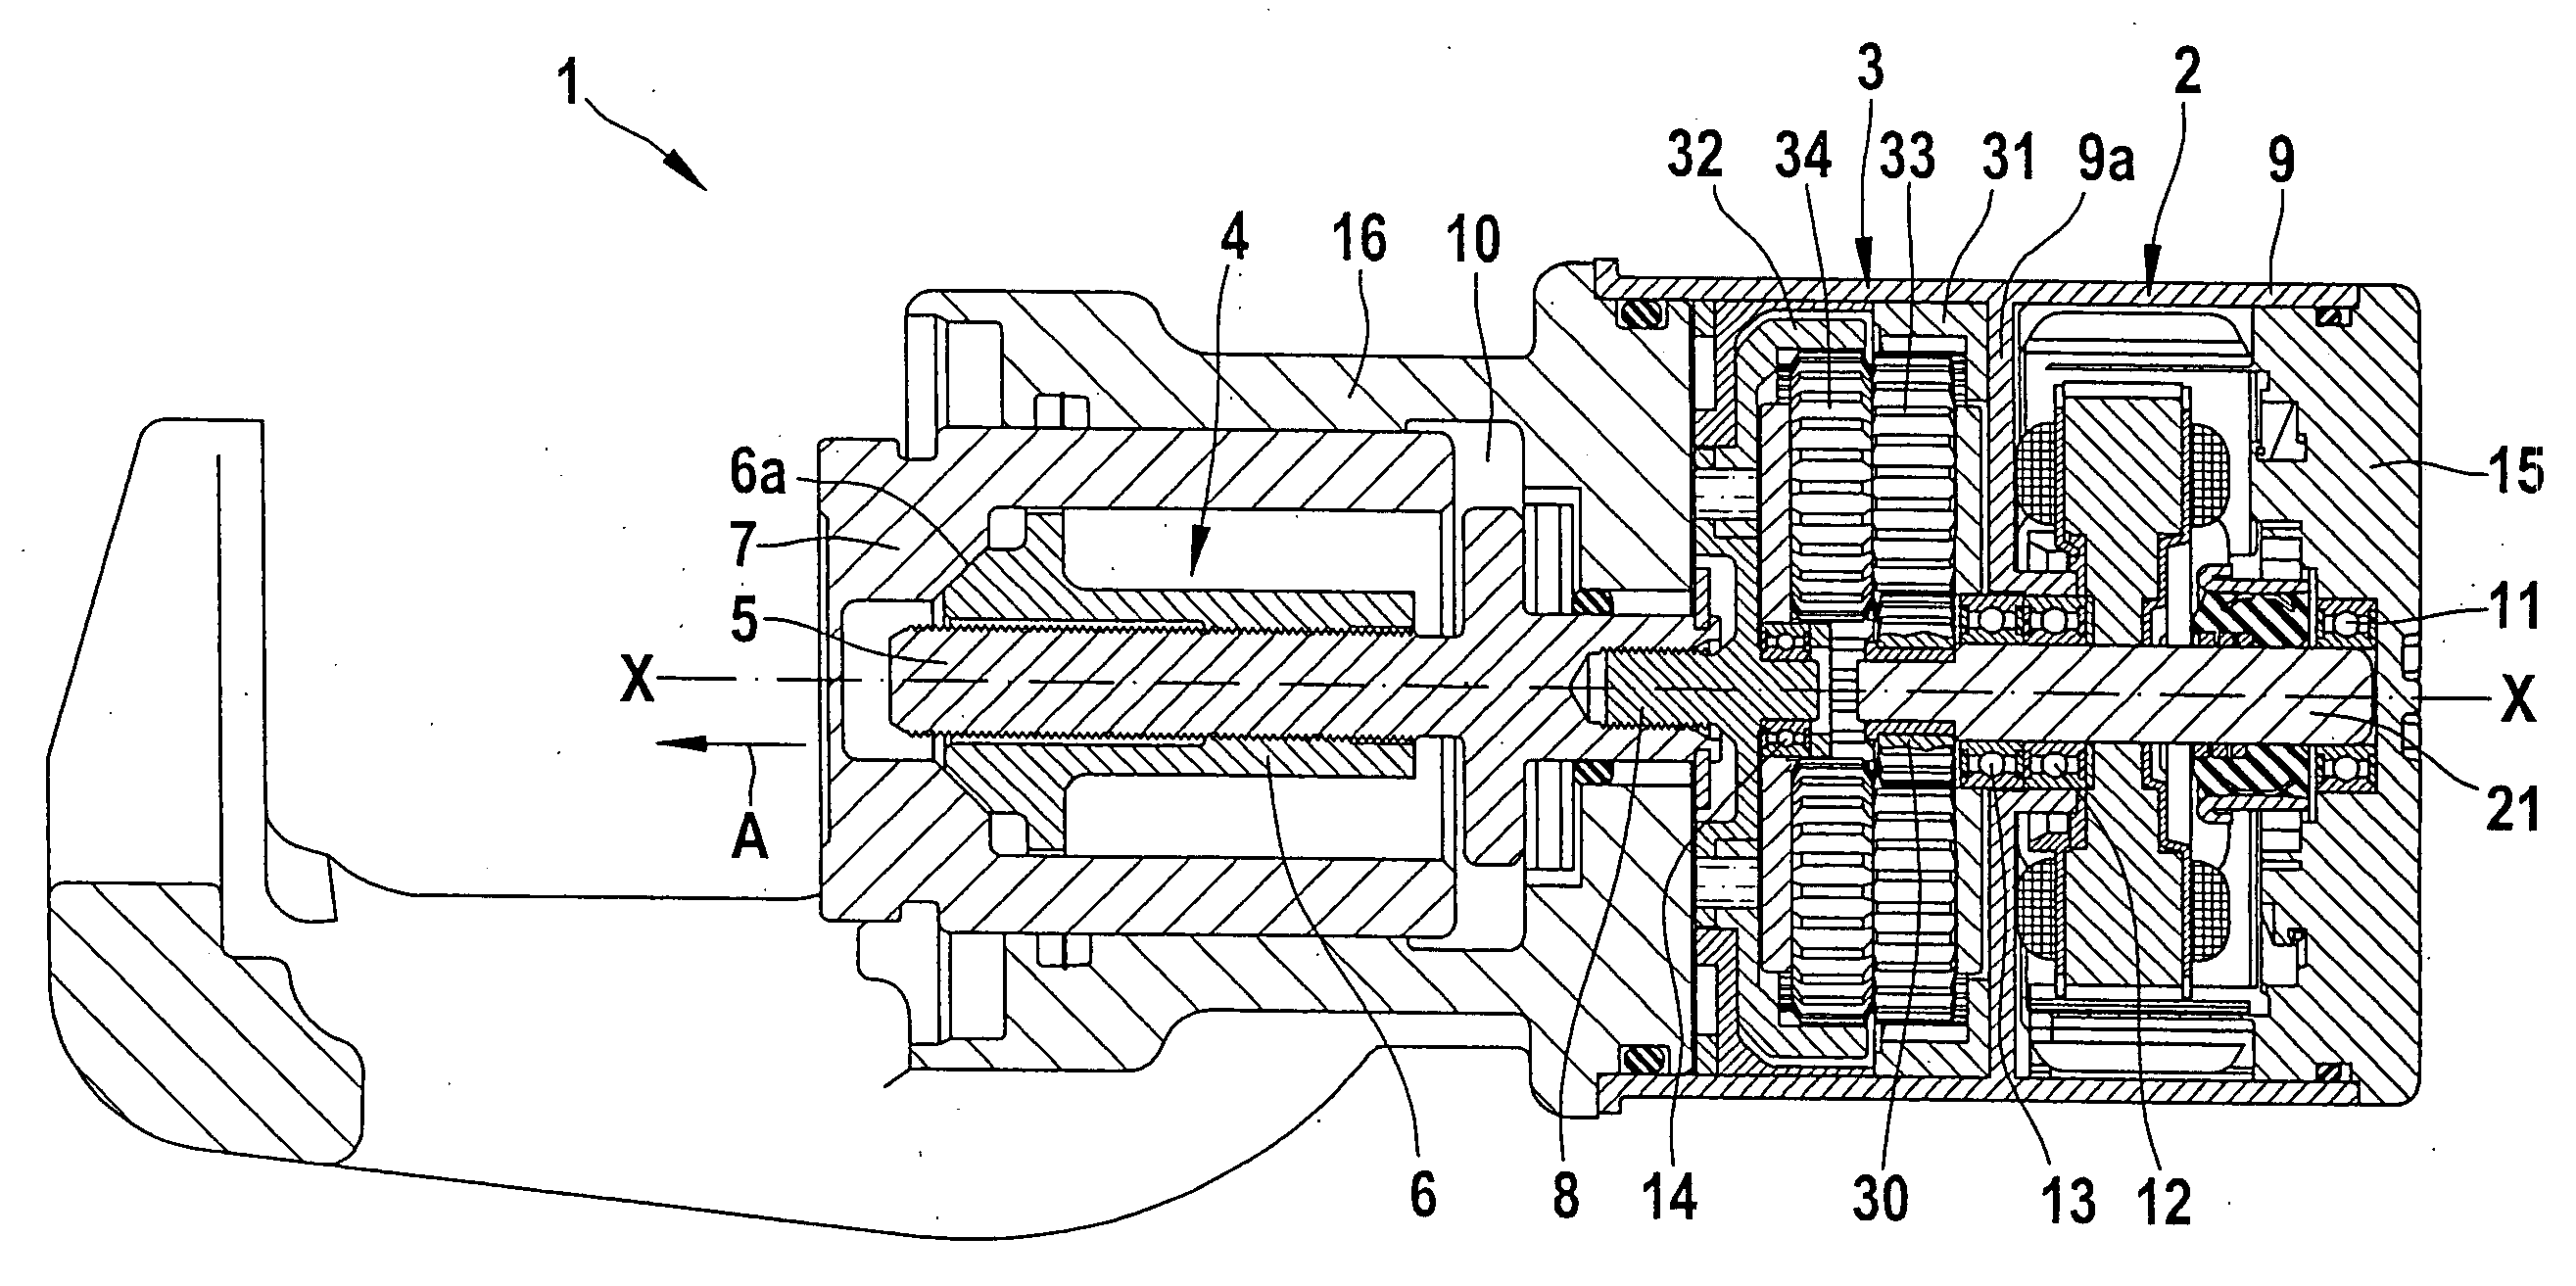 Combined service and parking brake apparatus and method for executing an emergency braking action